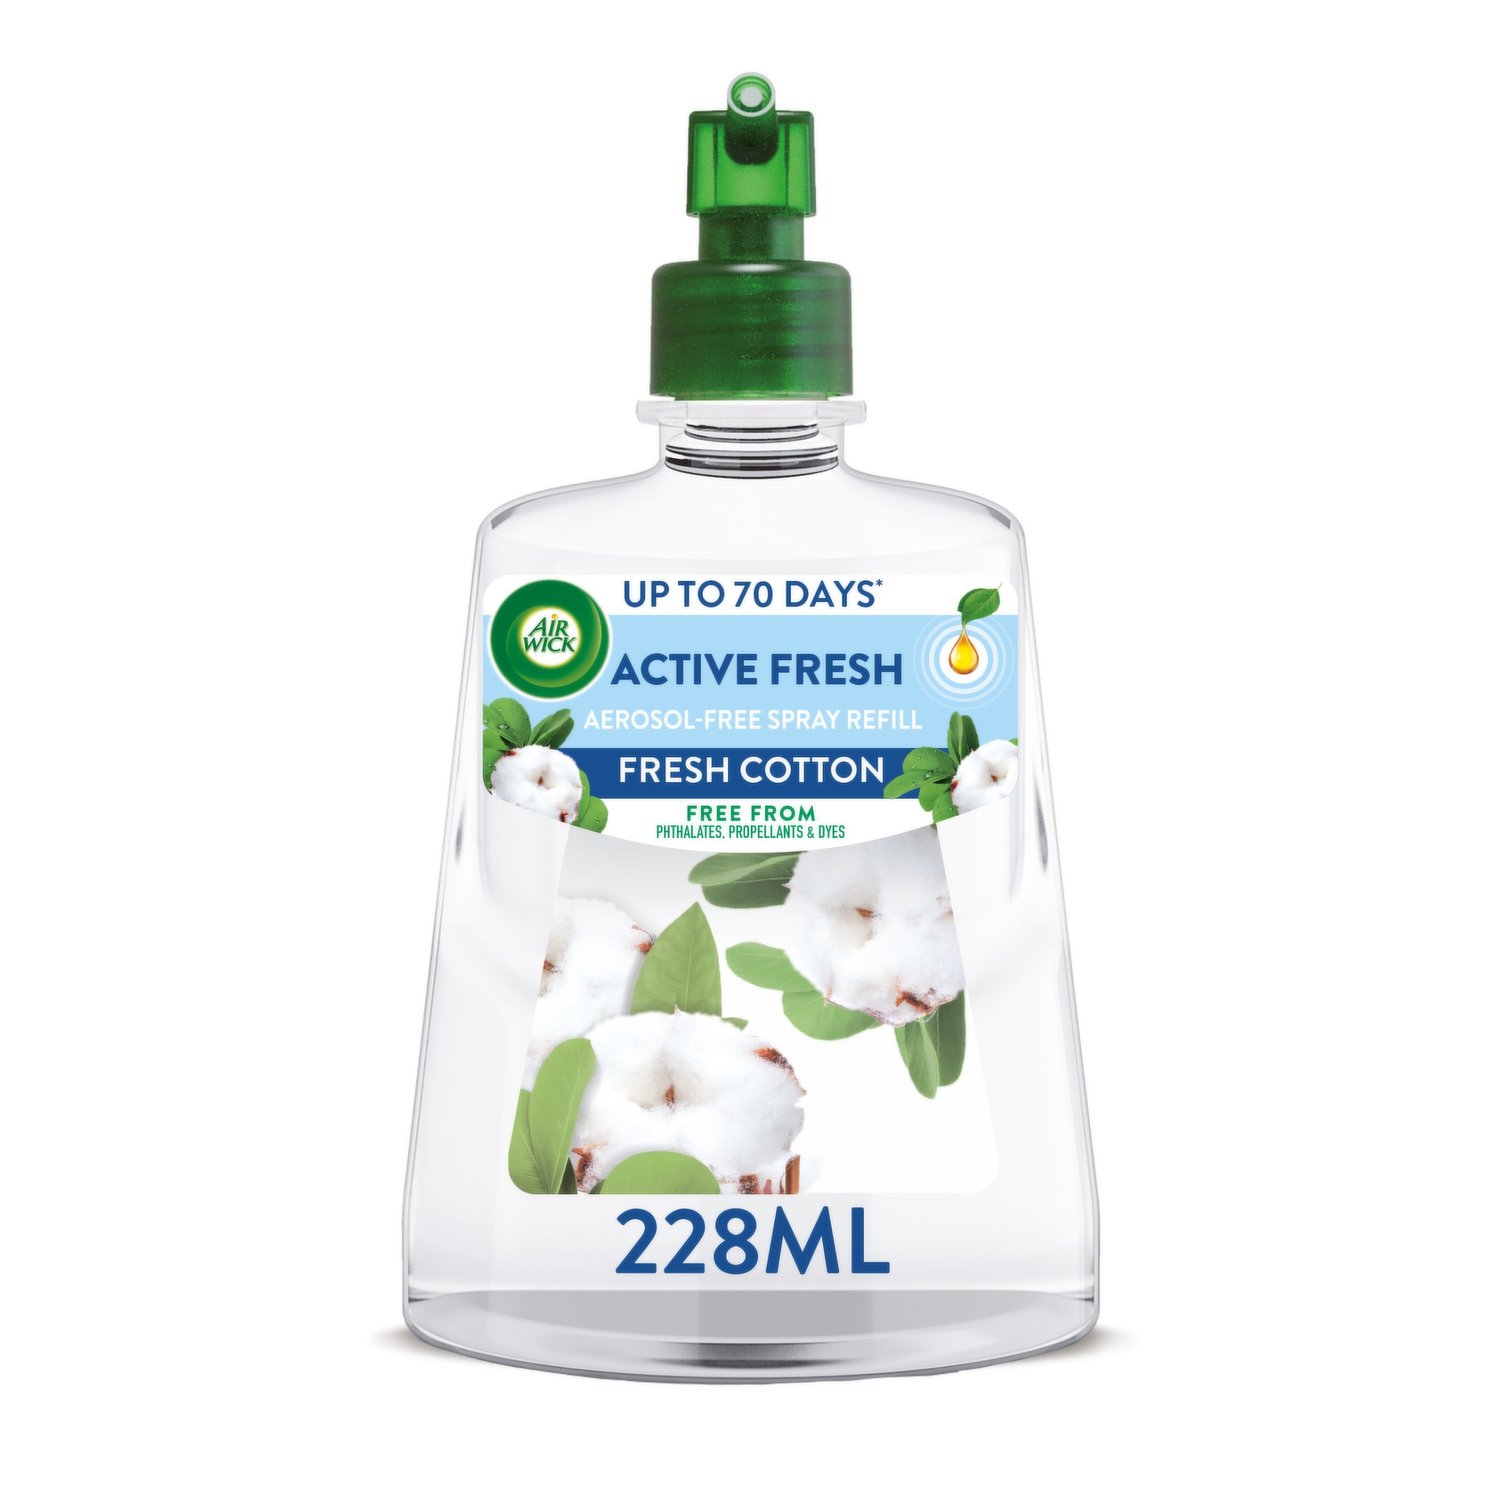 Air Wick Eucalyptus & Freesia 24/7 Active Fresh Kit Lasts up to 70 days -  Dunnes Stores